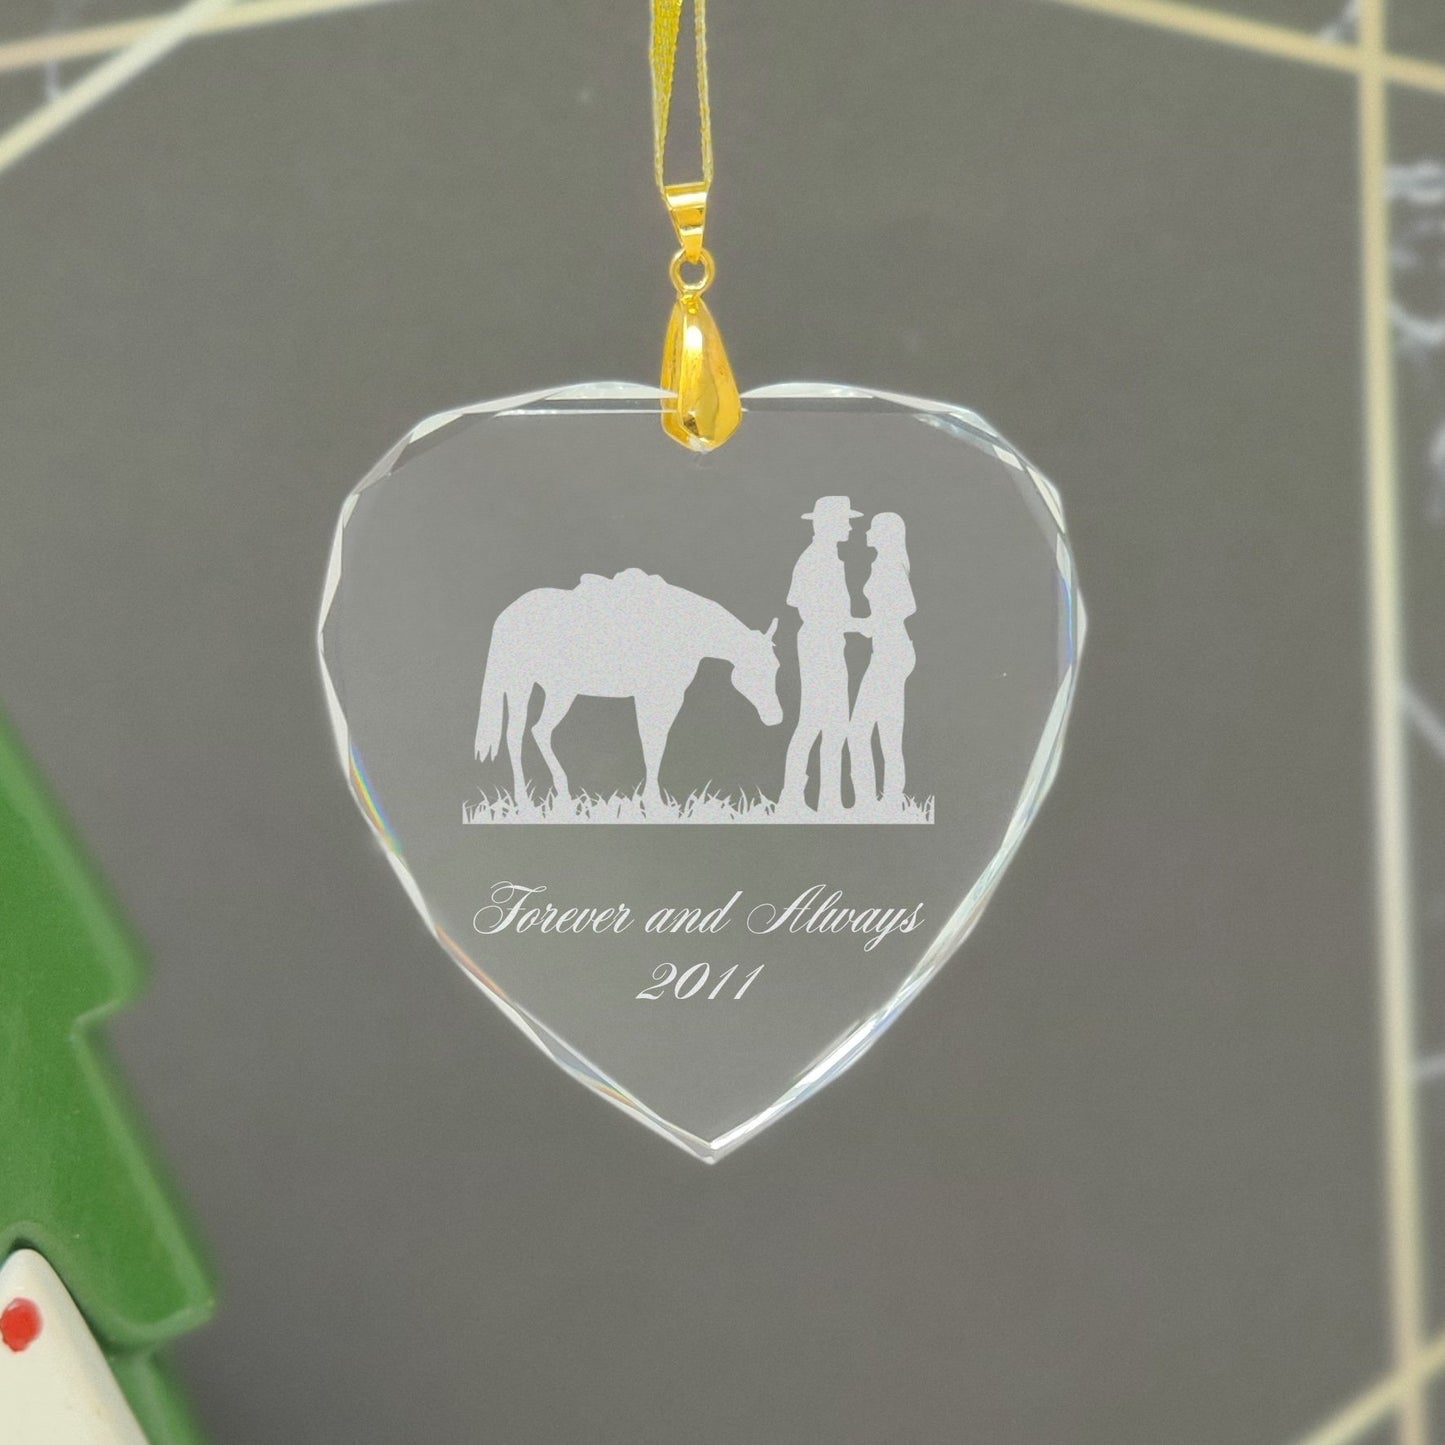 LaserGram Christmas Ornament, Sea Turtle Family, Personalized Engraving Included (Heart Shape)